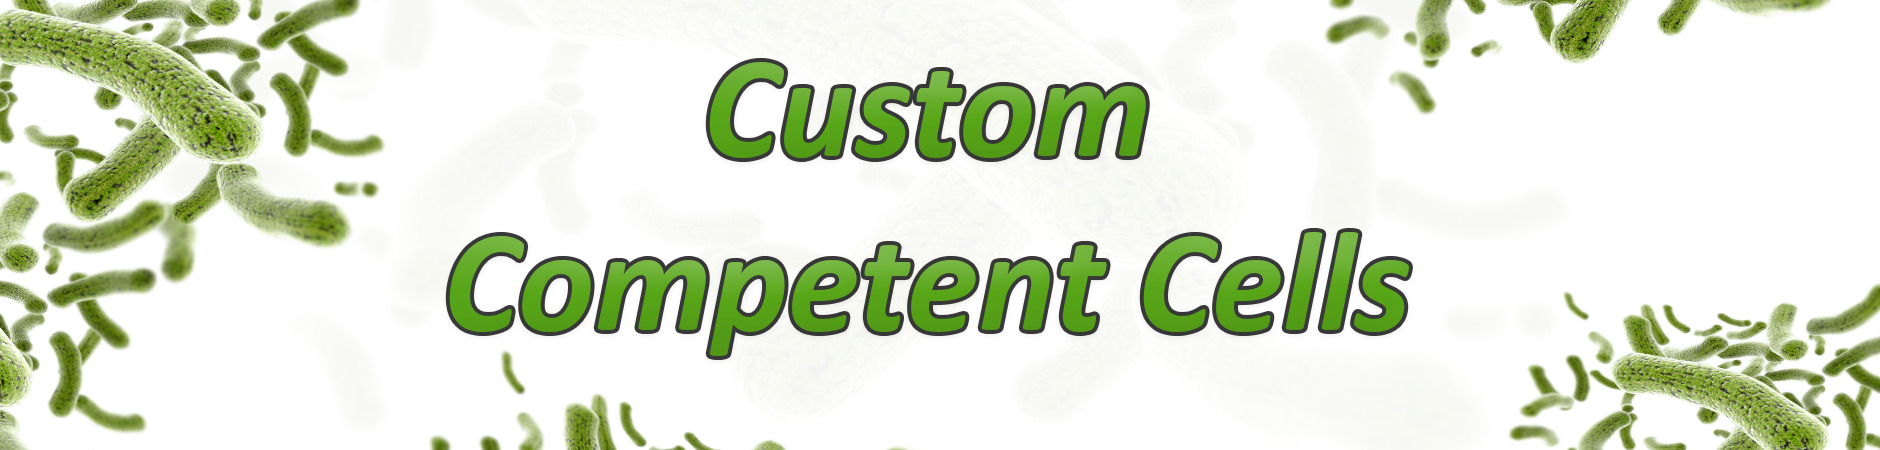 Custom Competent Cell Banner